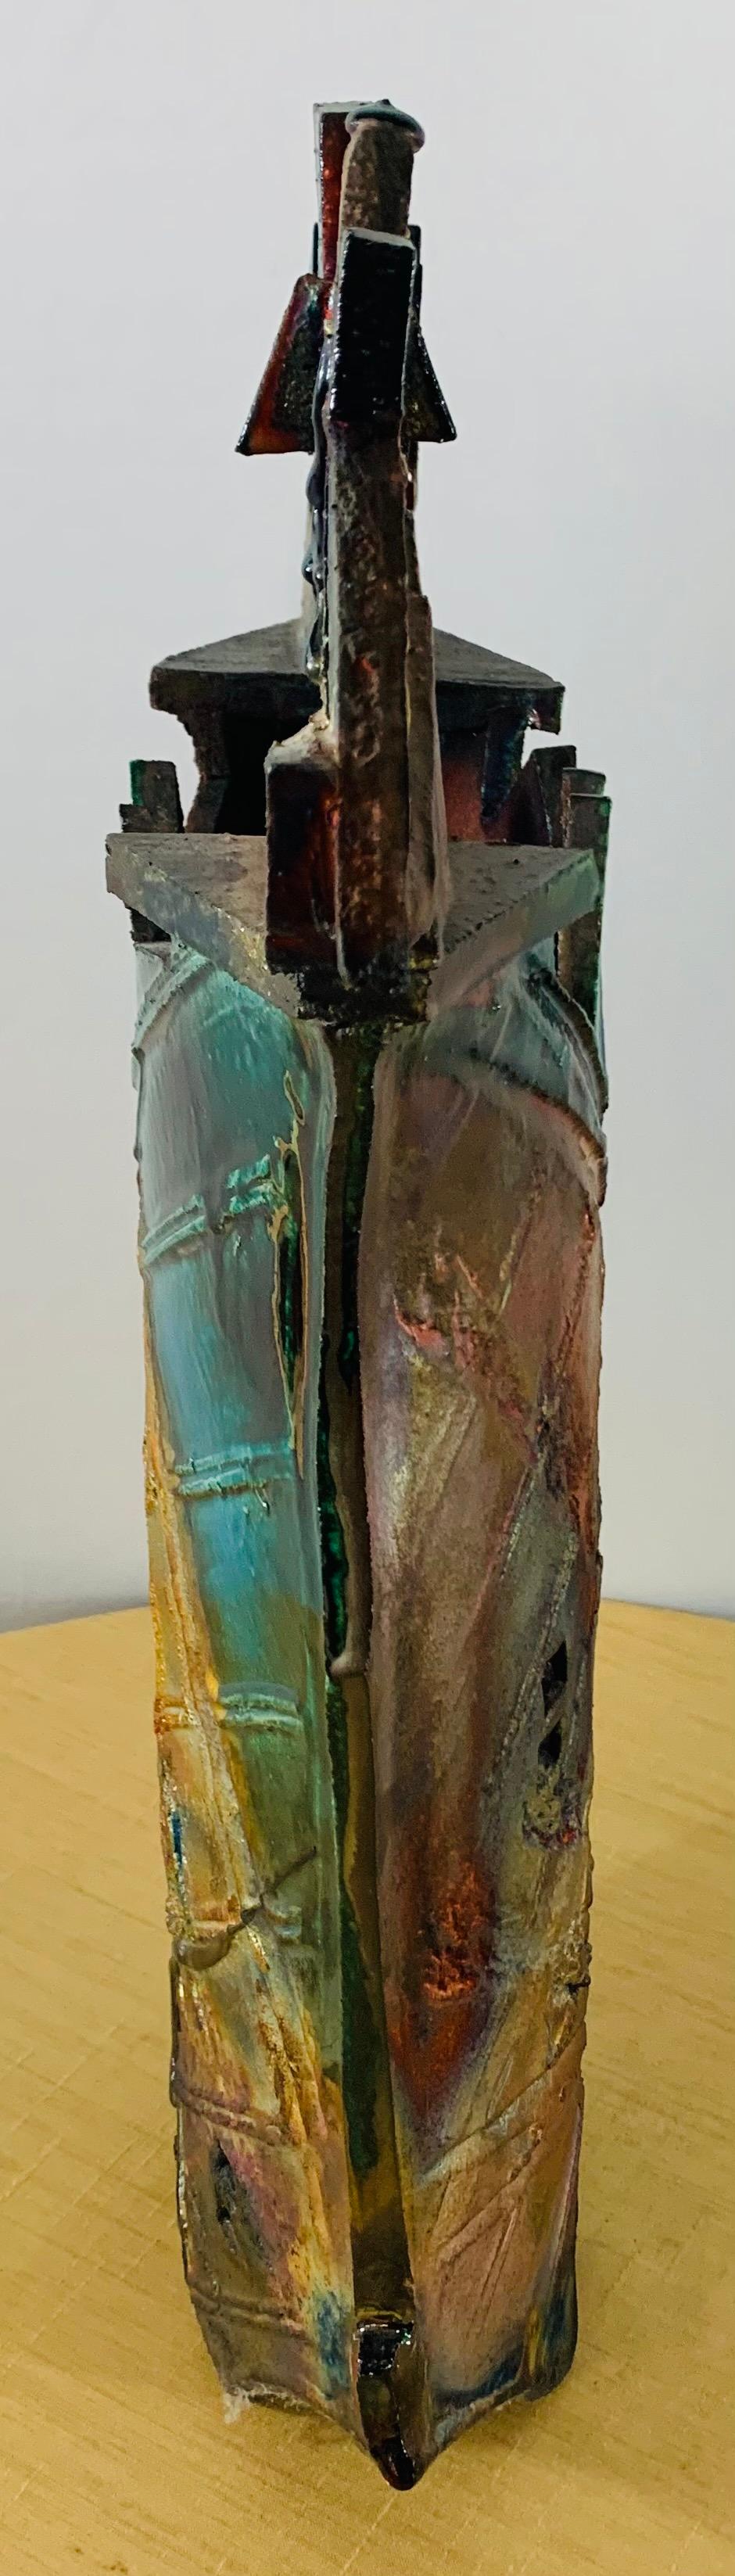 A unique and highly decorative glazed handmade Brutalist vase or sculpture. The multi-colorful vase/ sculpture features geometrical shapes and elaborated carving details. While painted in earthy tone colors. The art piece seems to be signed in the